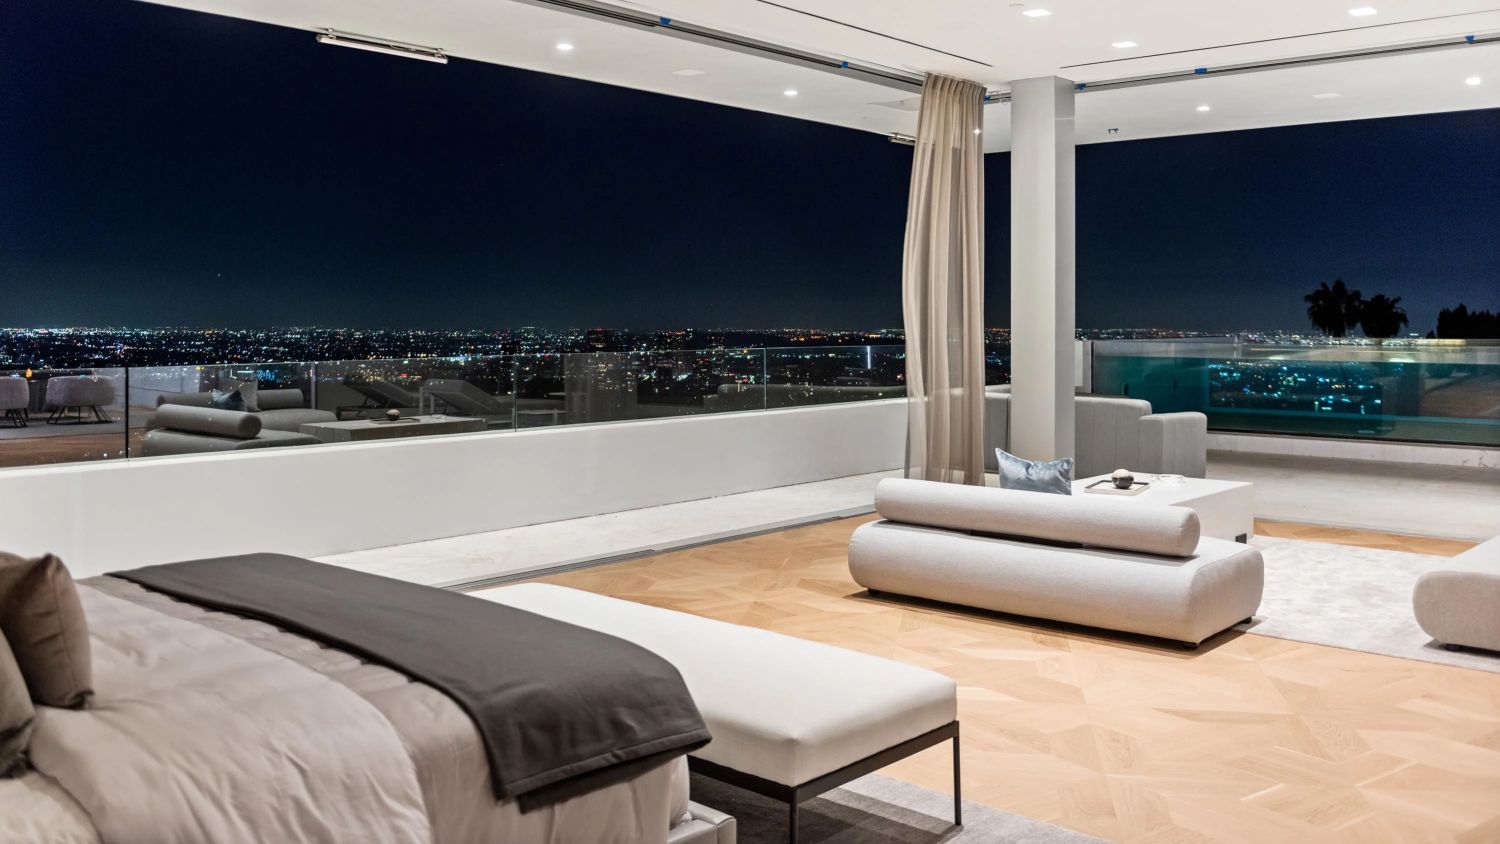 A bedroom in The One, Los Angeles